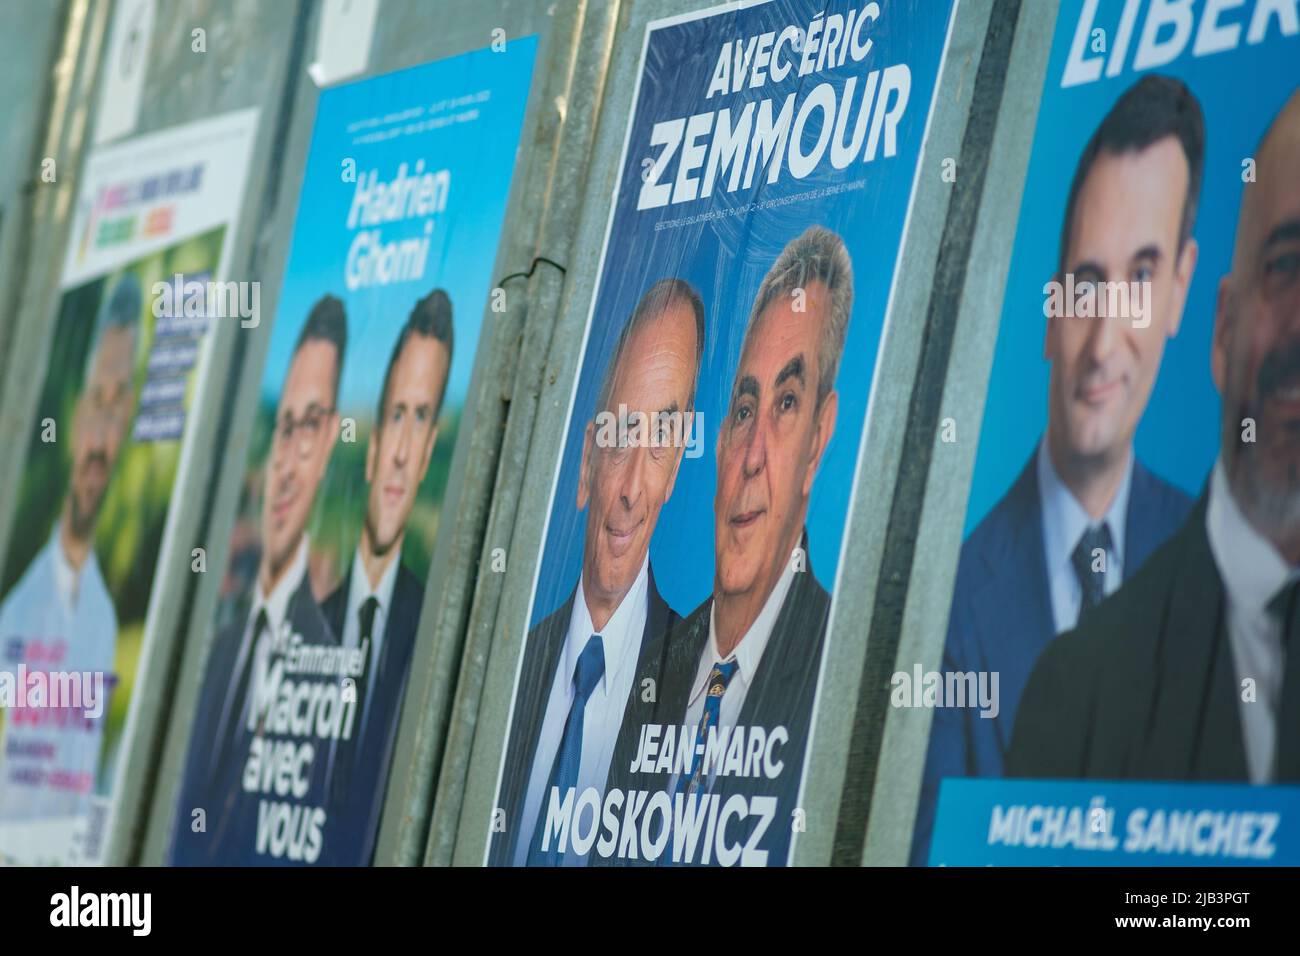 Paris, France - June 2, 2022 : Portrait of Eric Zemmour,  Jean-Marc Moscowicz and other politician leaders on a campaign poster in Paris Stock Photo